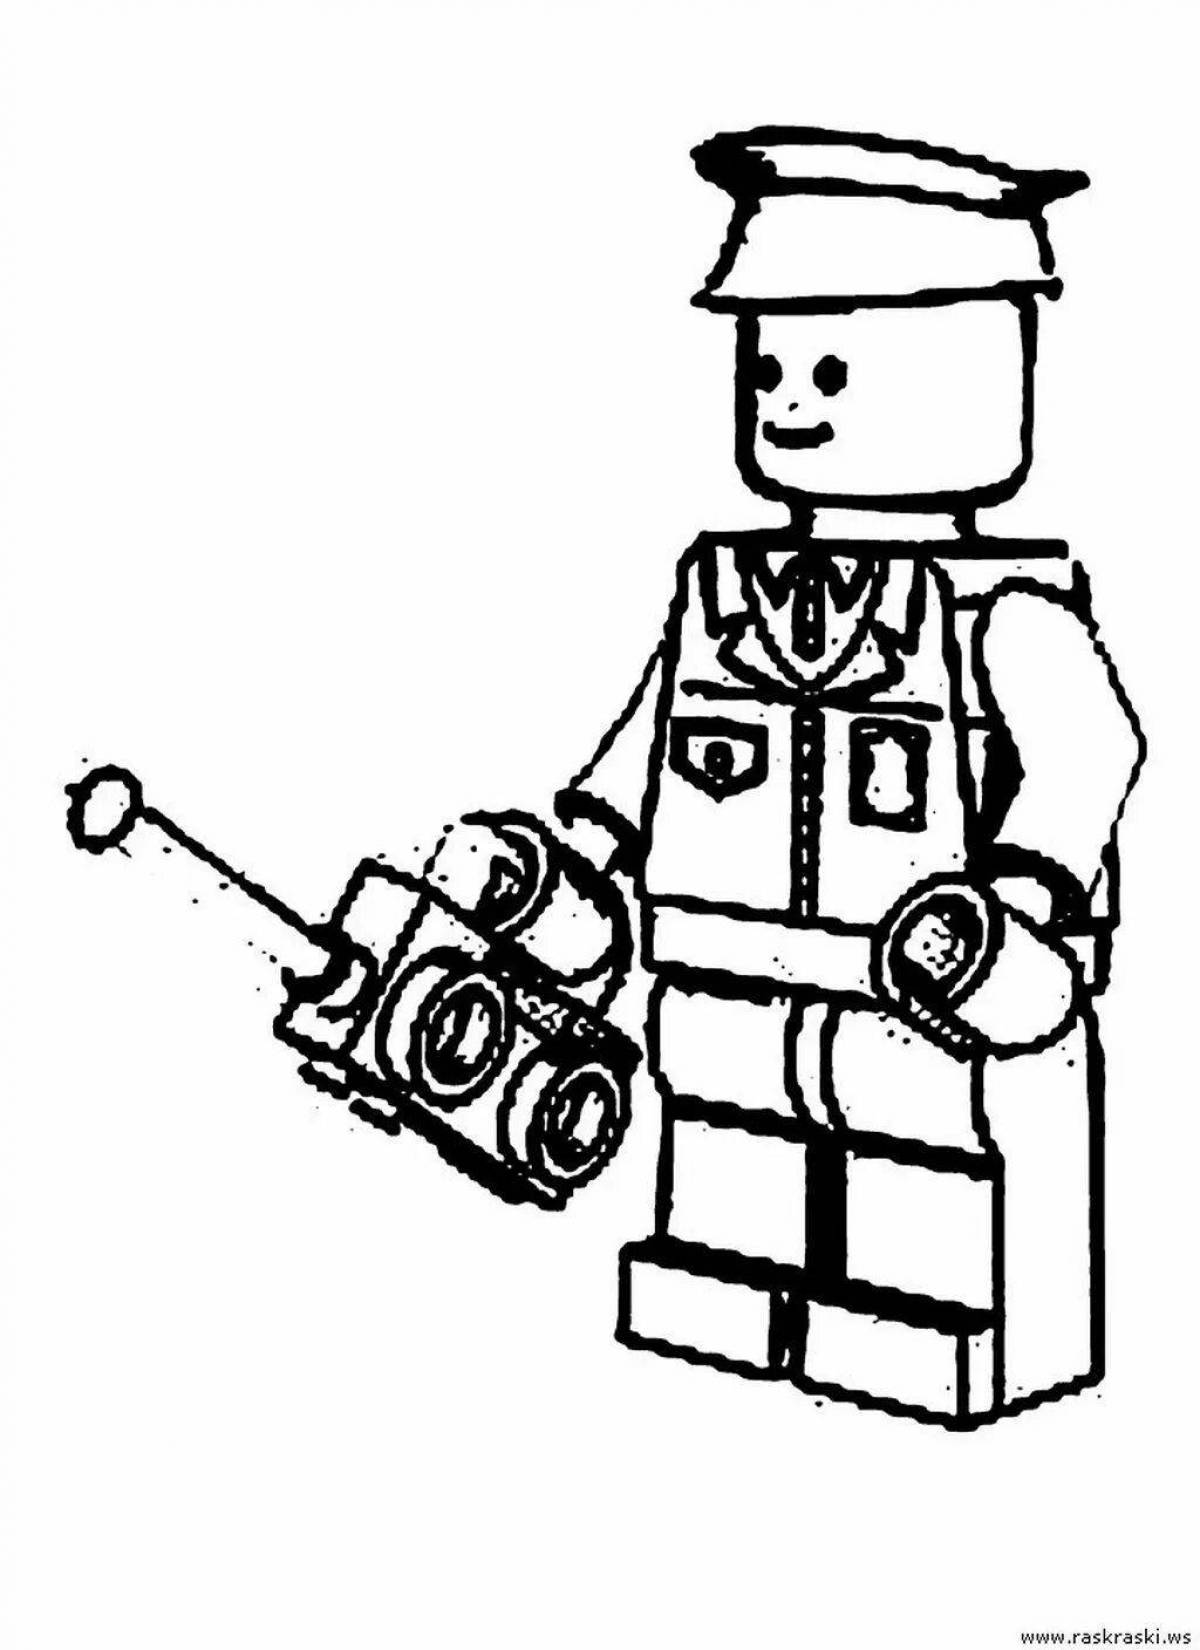 Impressive lego toy soldiers coloring book